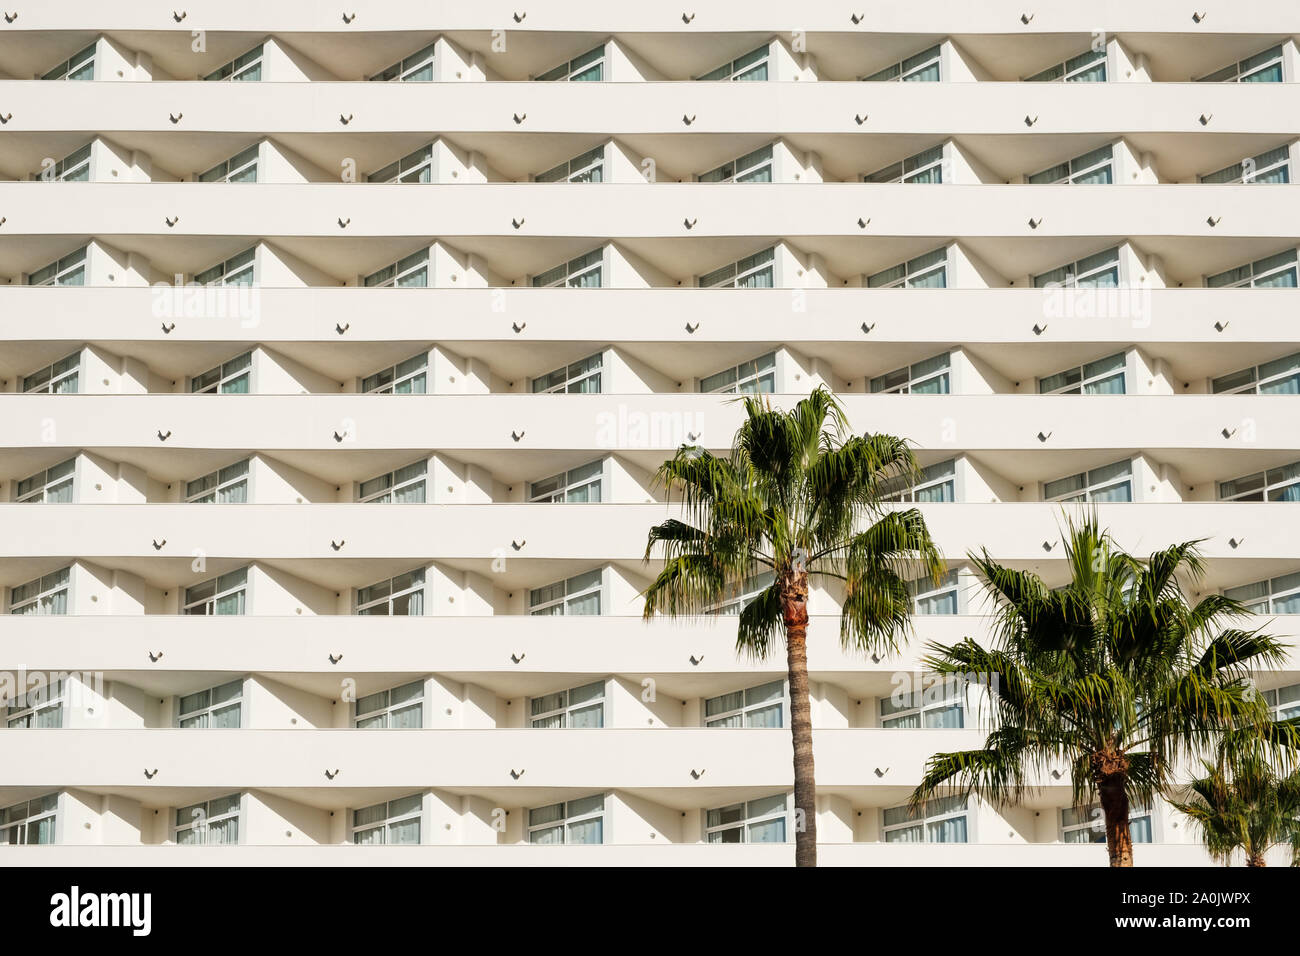 facade of a big hotel building with balconies Stock Photo